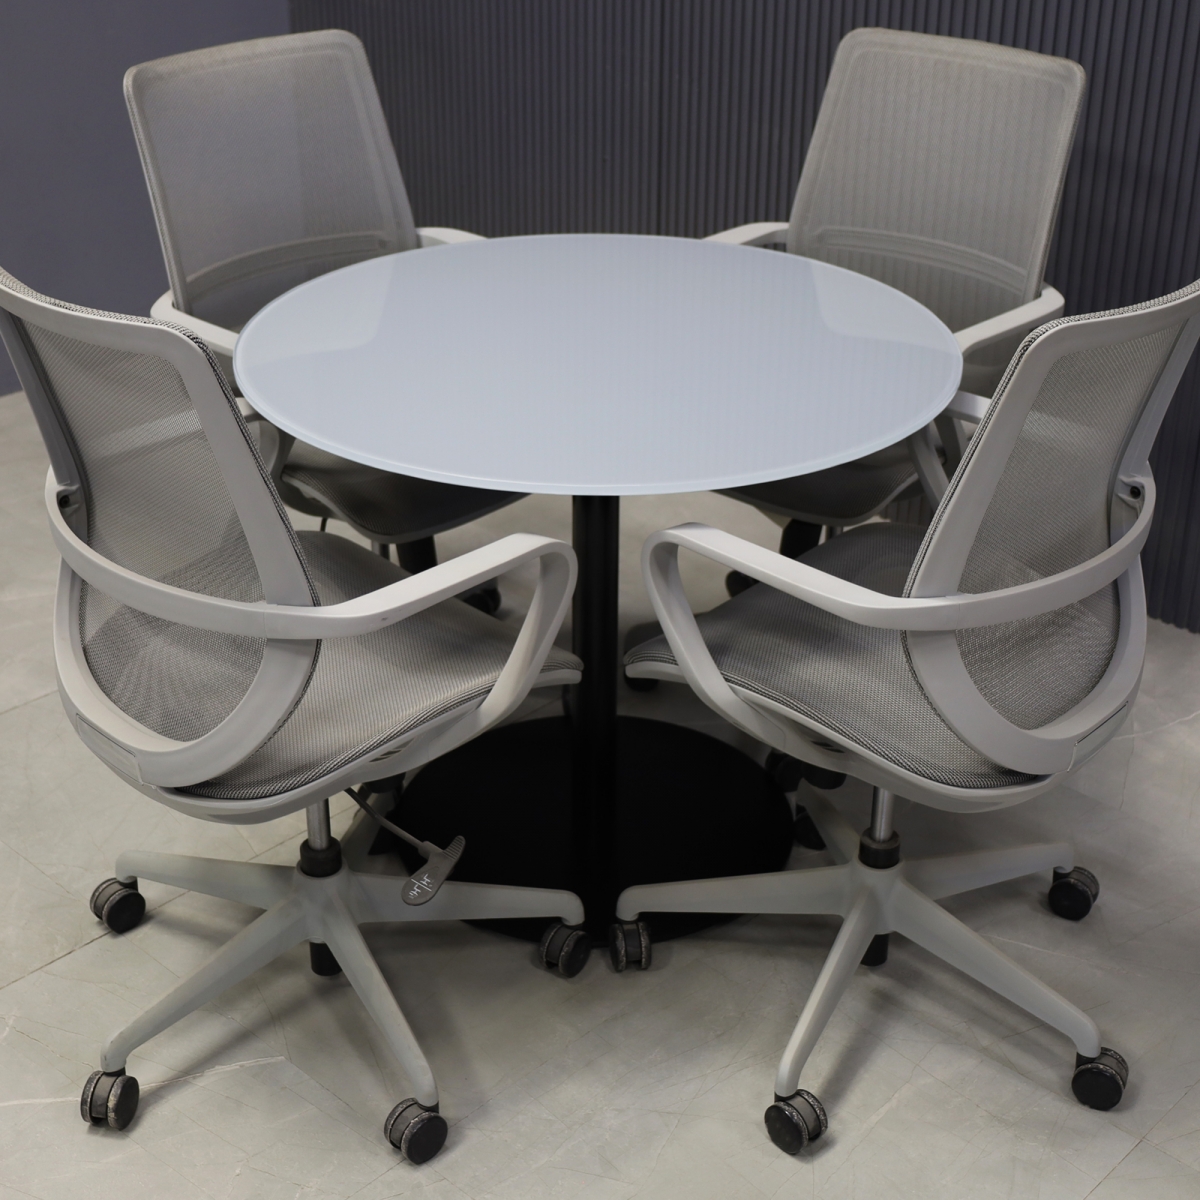 California Round Conference Table with Tempered Glass Top